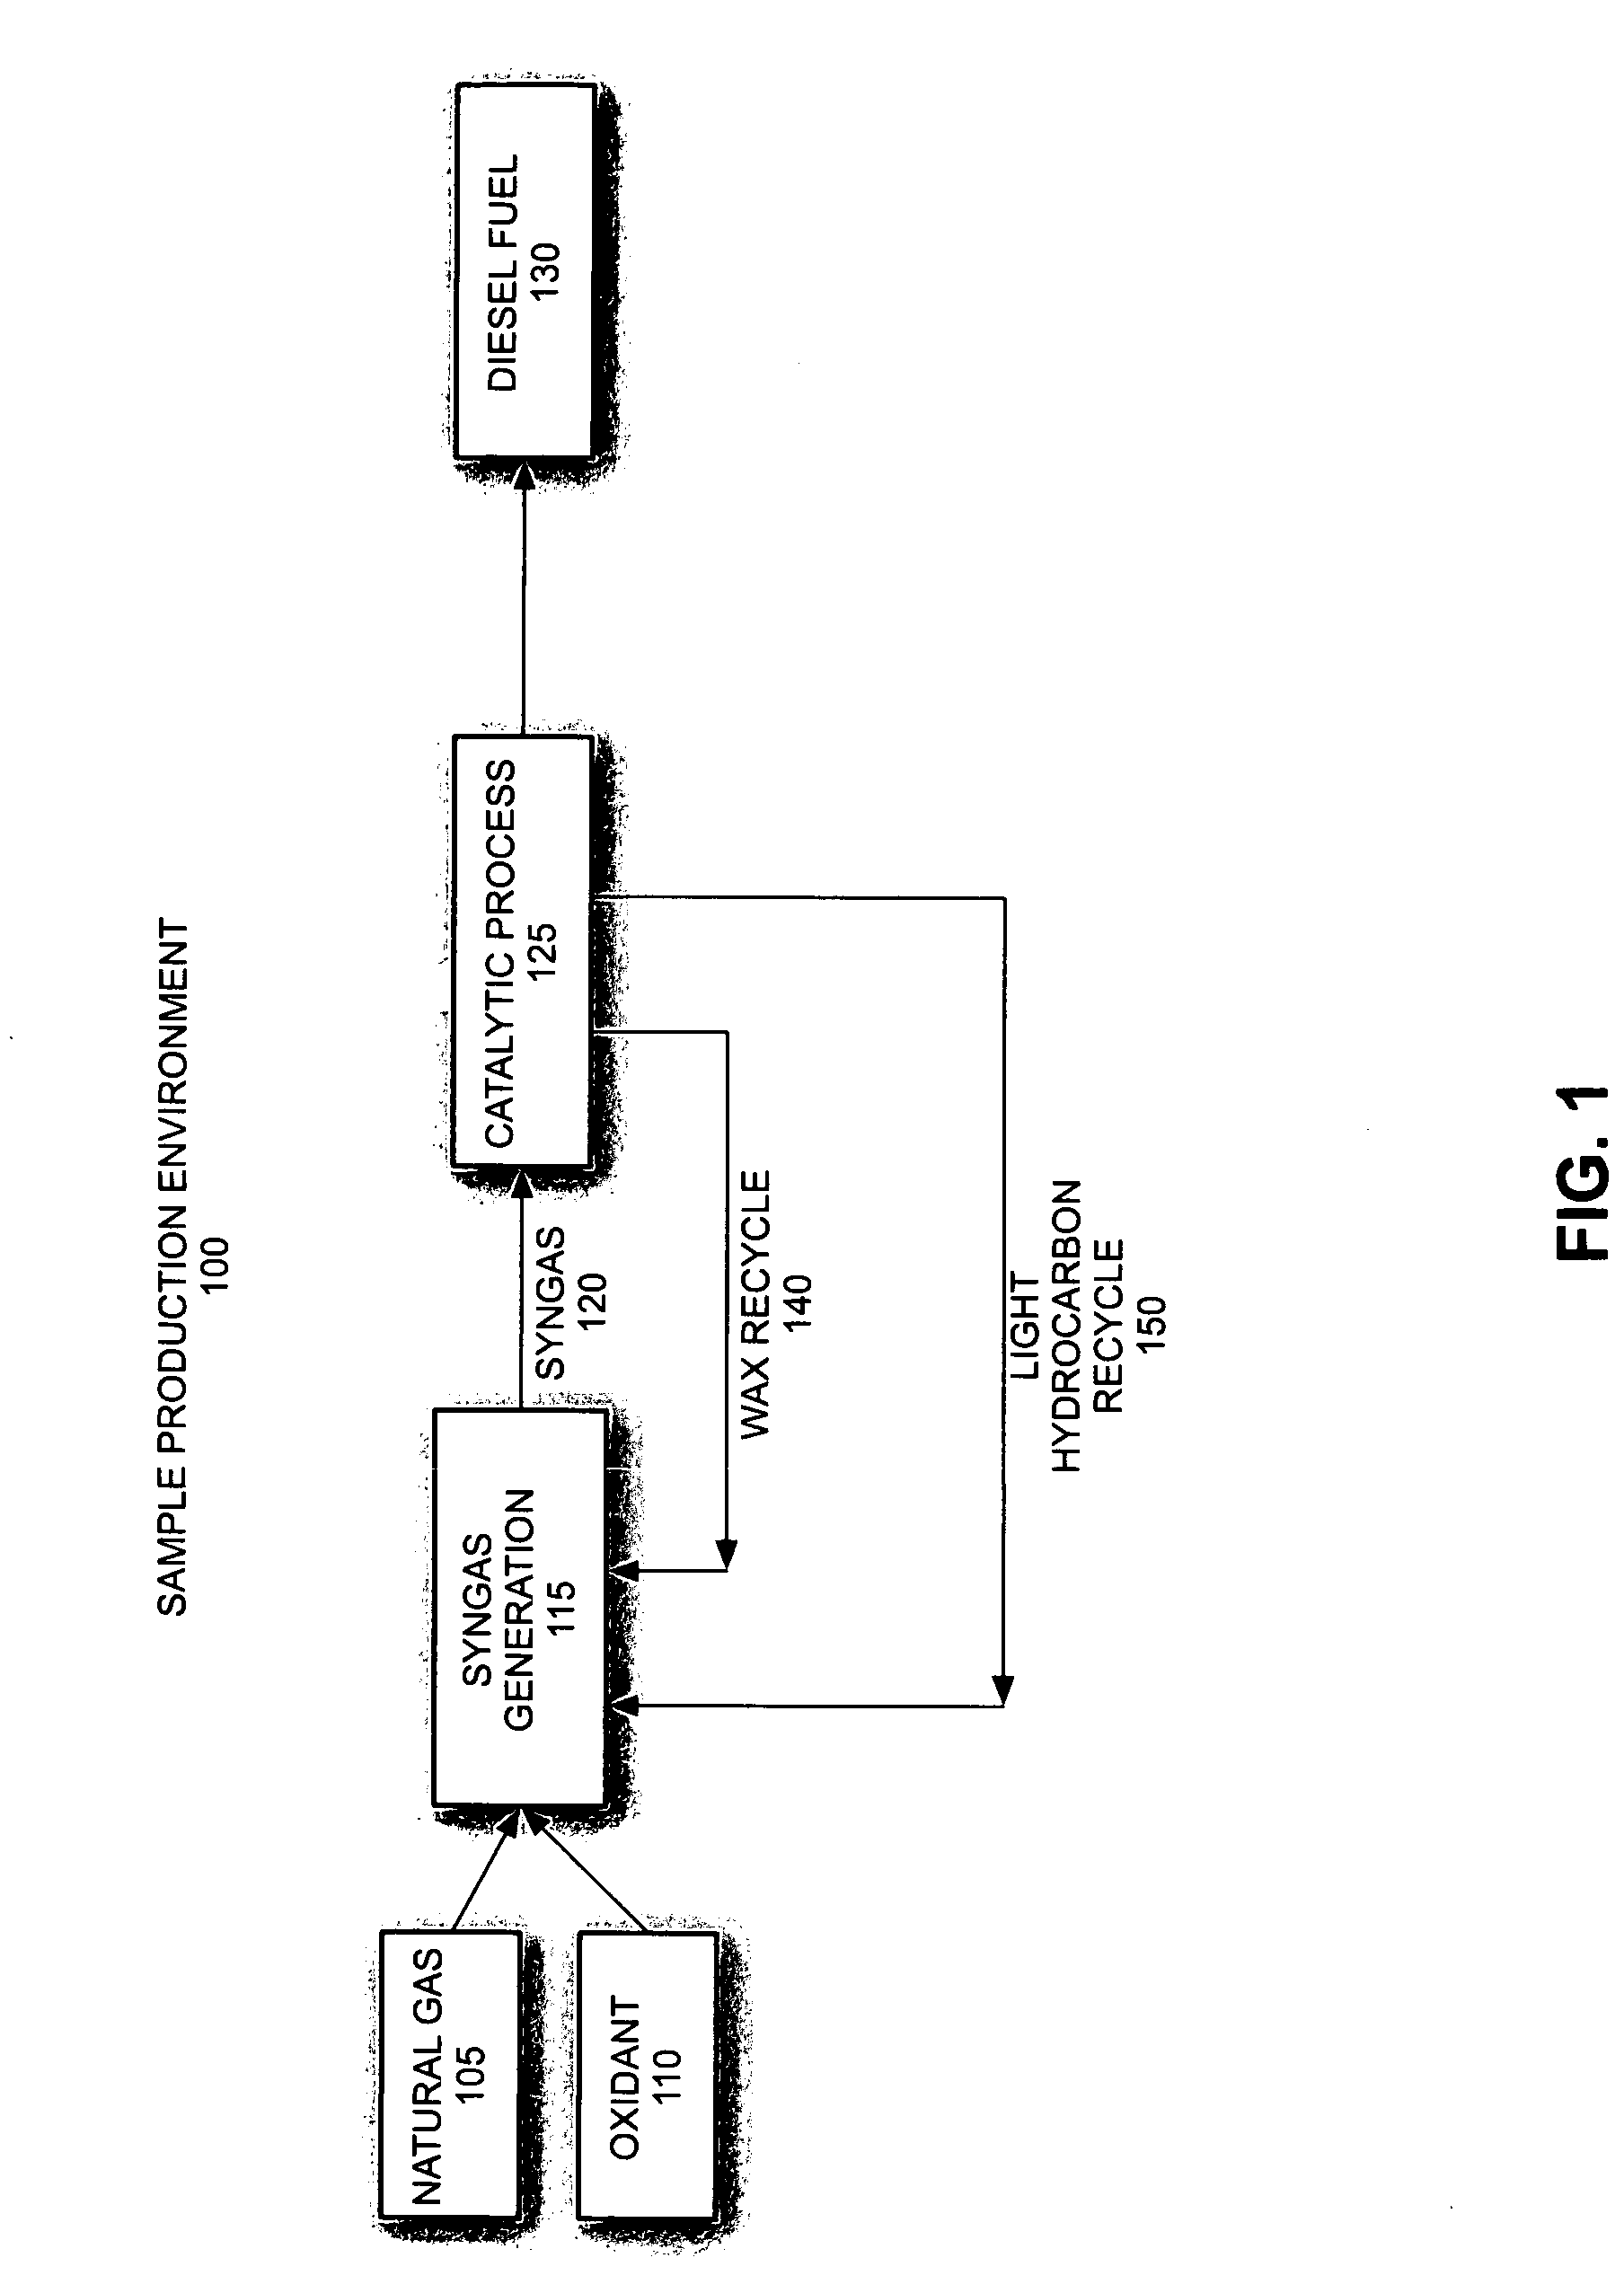 Process for small scale gas to liquid hydrocarbon production through recycling